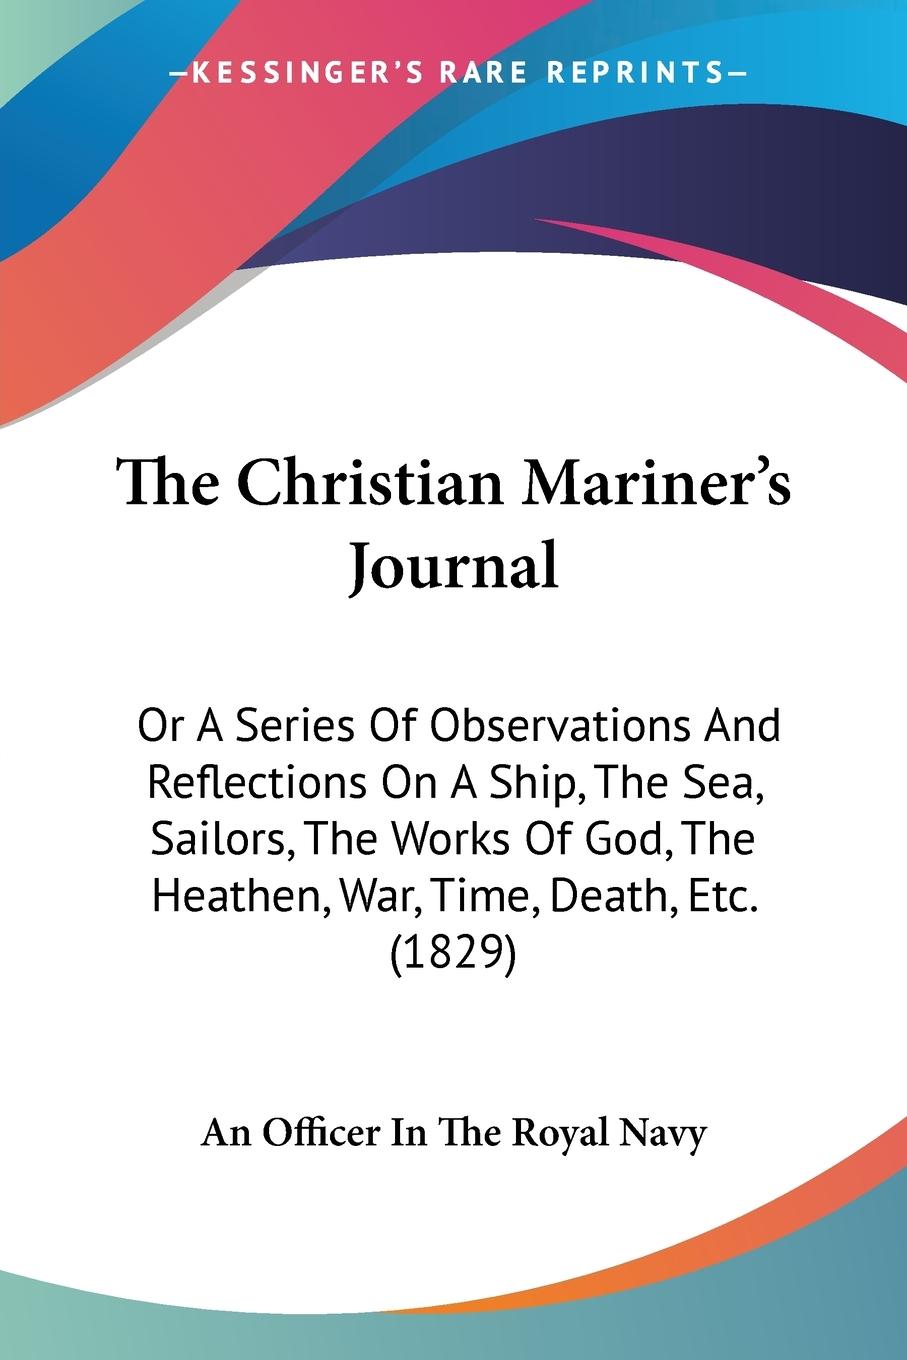 The Christian Mariner s Journal - An Officer In The Royal Navy